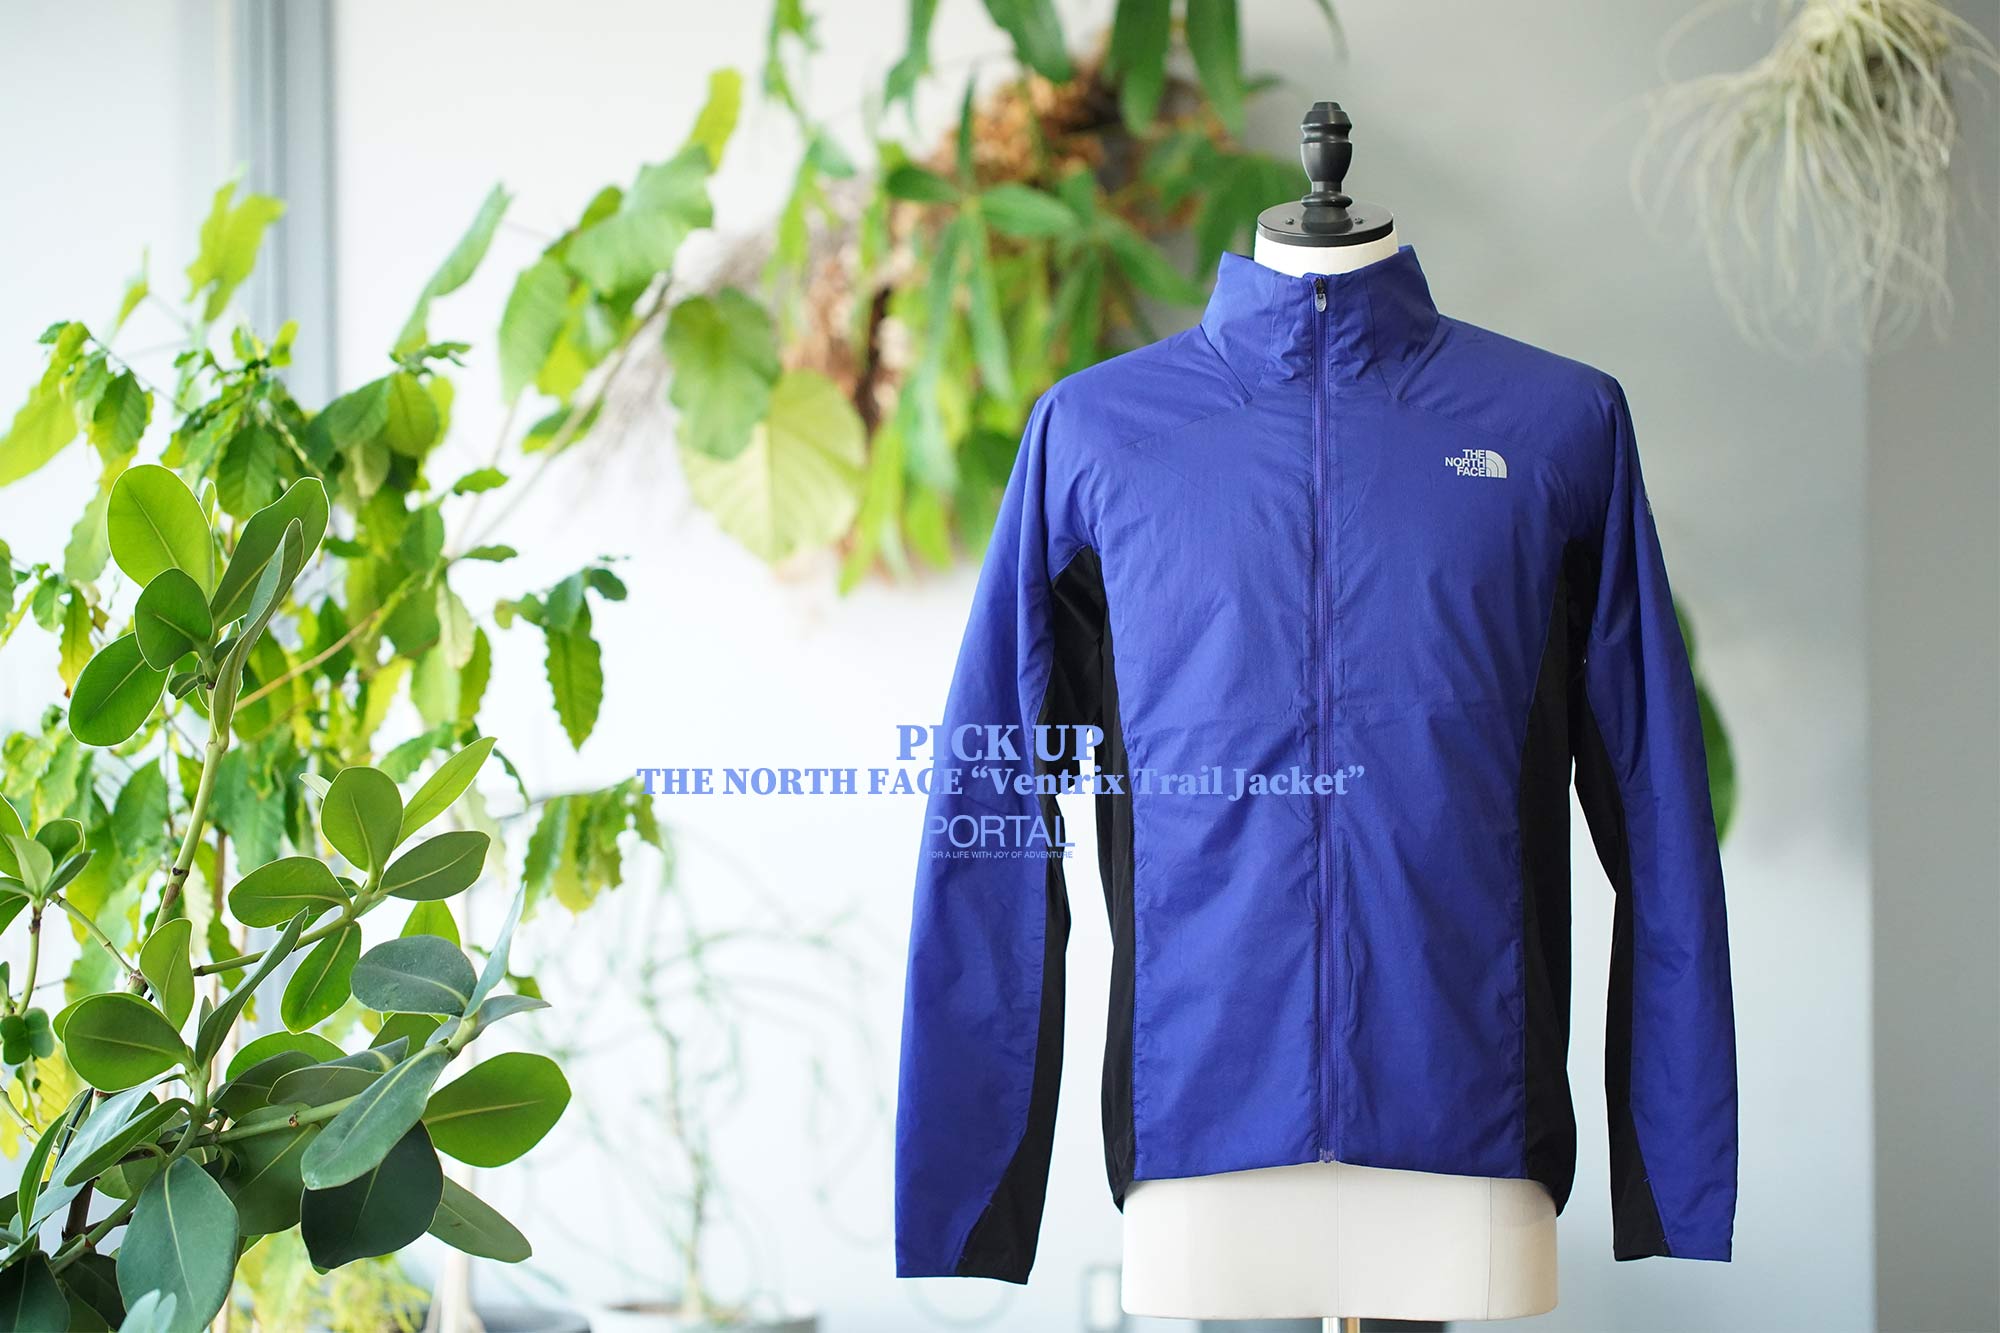 THE NORTH FACE "Ventrix Trail Jacket"